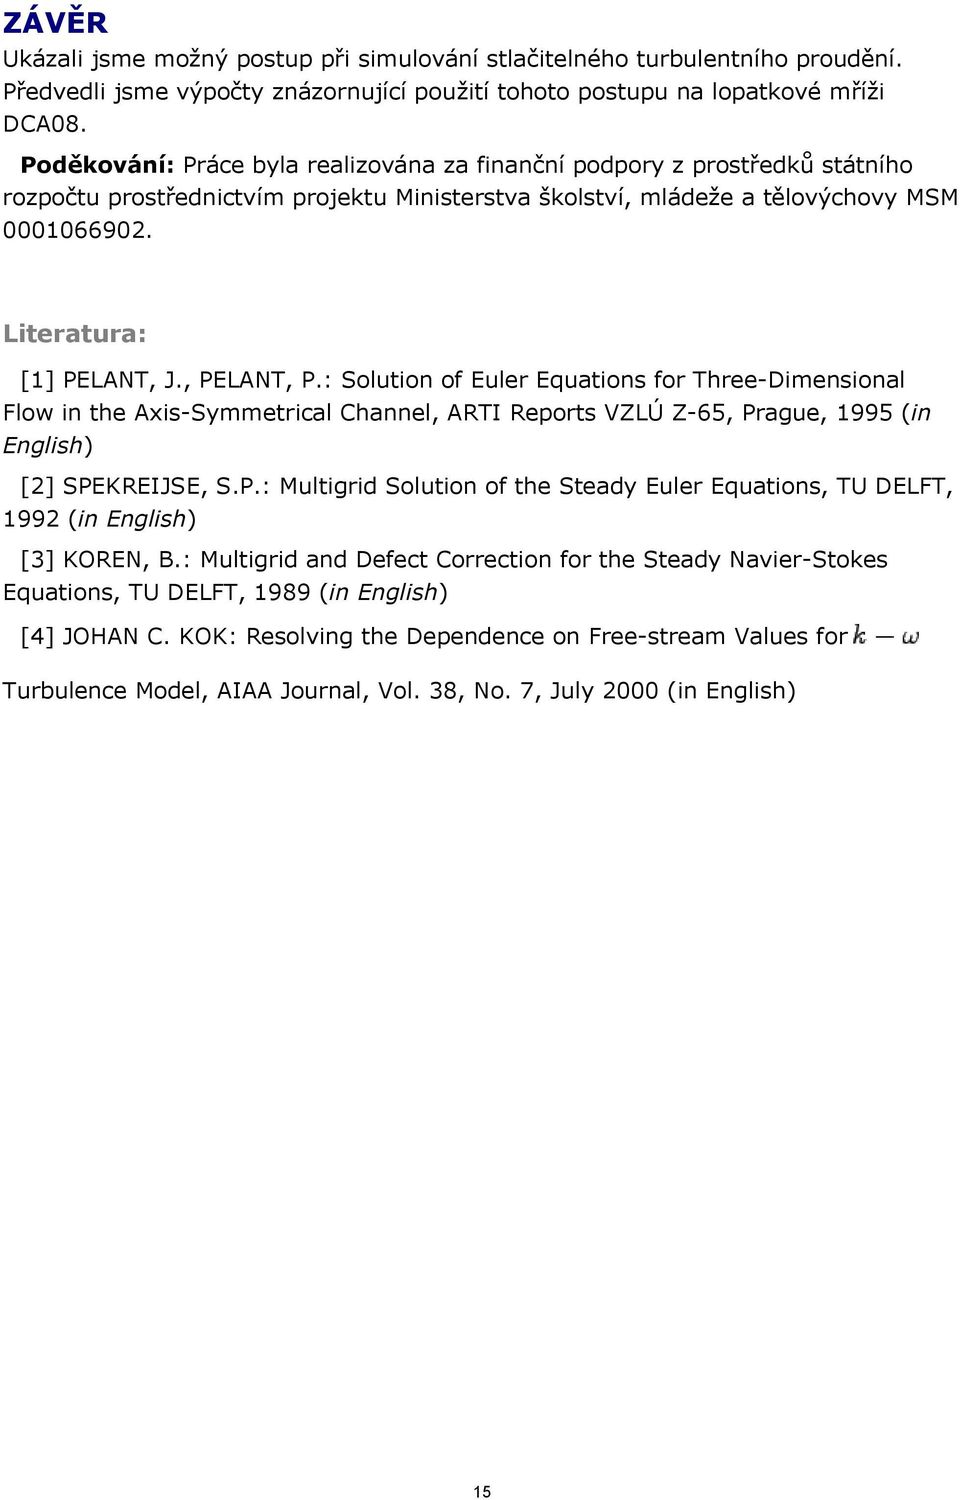 , PELANT, P.: Solution of Euler Equations for Three-Dimensional Flow in the Axis-Symmetrical Channel, ARTI Reports VZLÚ Z-65, Prague, 995 (in English) [] SPEKREIJSE, S.P.: Multigrid Solution of the Steady Euler Equations, TU DELFT, 99 (in English) [3] KOREN, B.